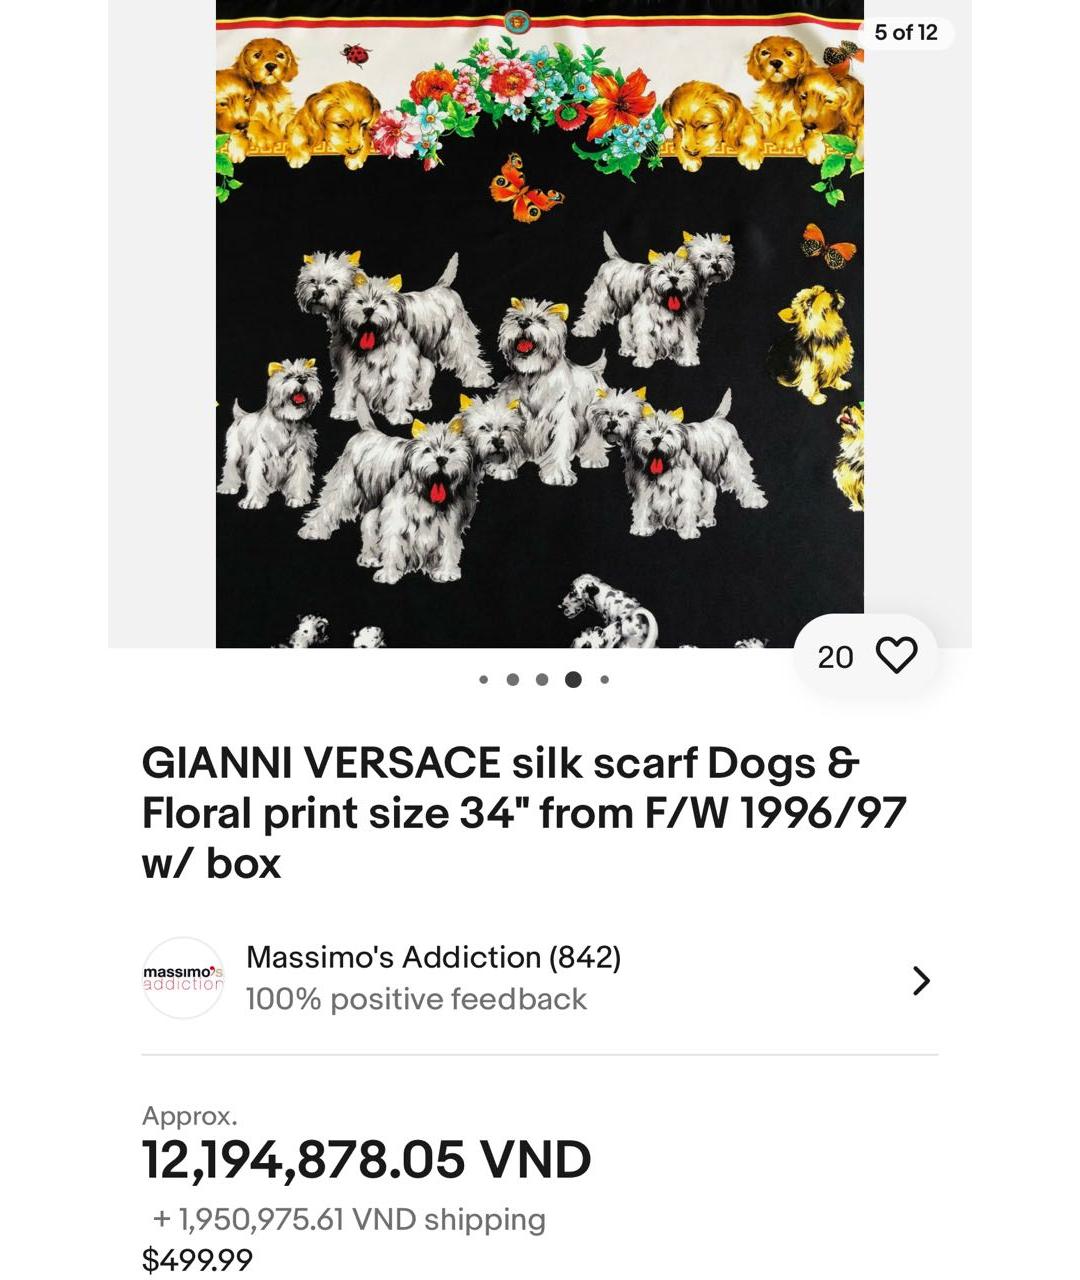 GIANNI VERSACE silk scarf Dogs & Floral print size 34 from F/W 1996/97 w/  box